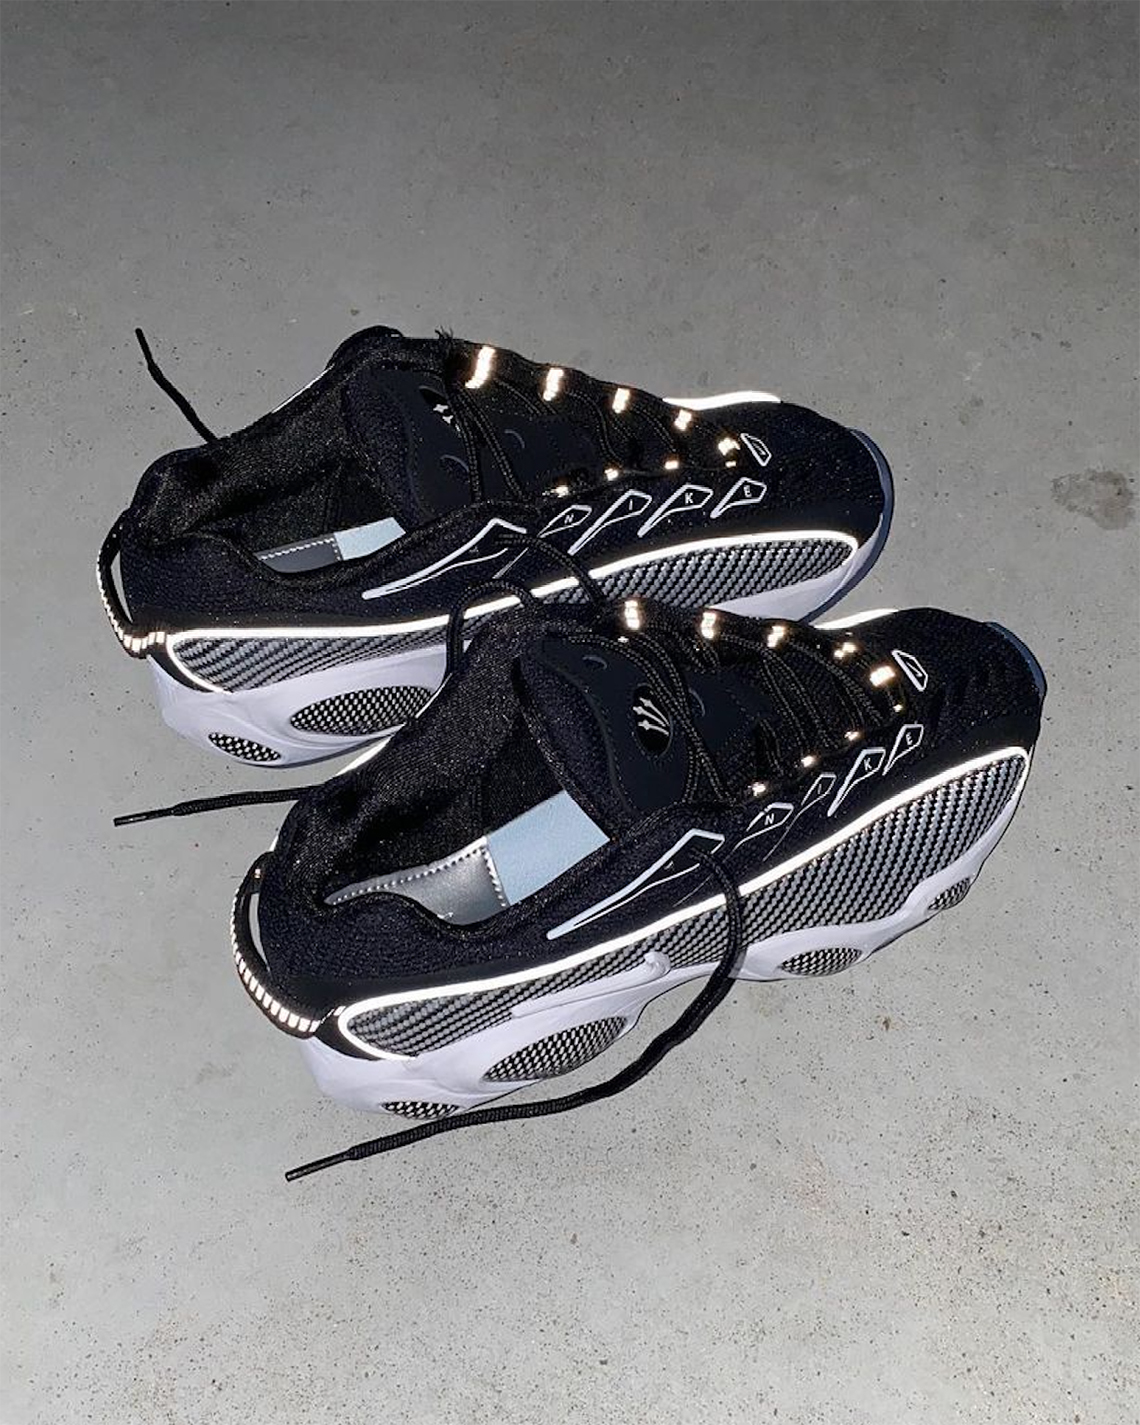 Drake's new NOCTA x Nike Glide is giving Nike Air Zoom 95 Reimagined.  Thoughts on @champagnepapi's new shoe? 🤔 📸: @theshoegame